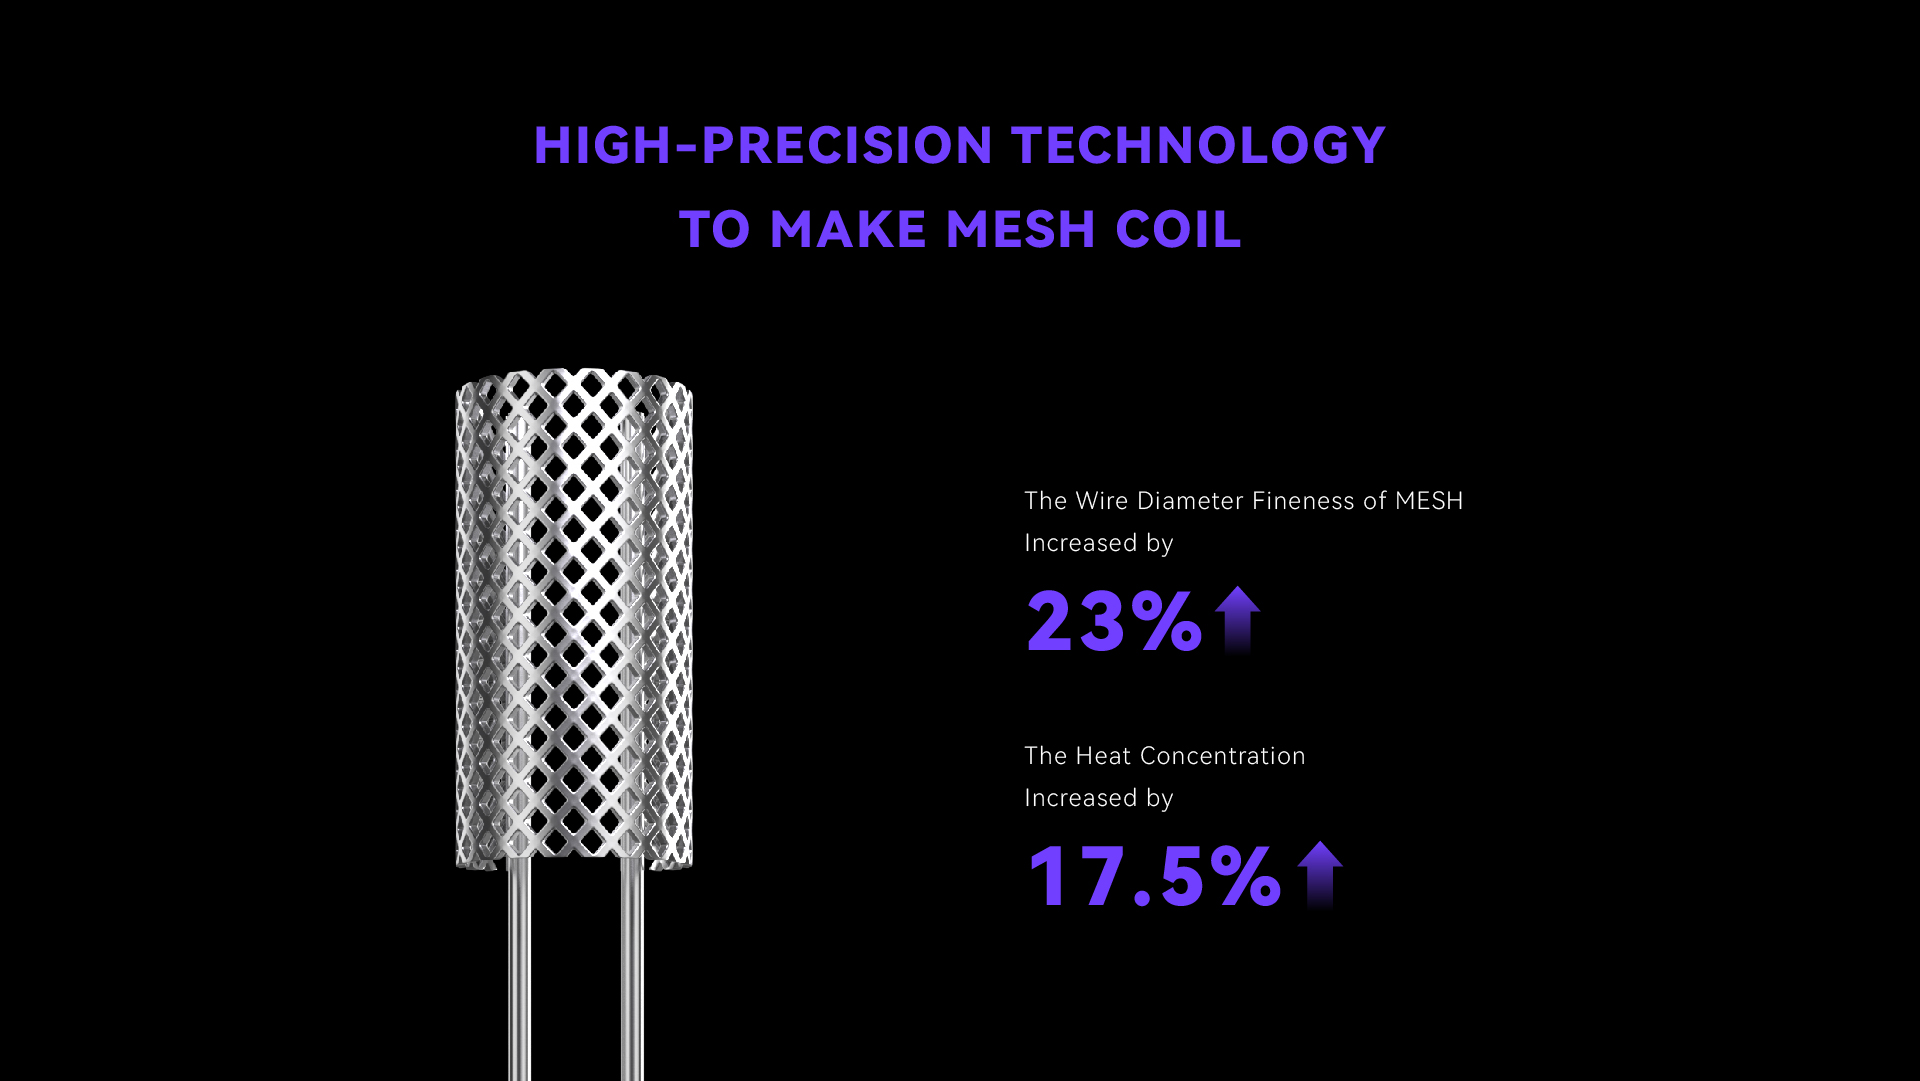 High-precision technology used to make mesh coils. 23% increase in mesh coil diameter accuracy. 17.5% increase in heat concentration.